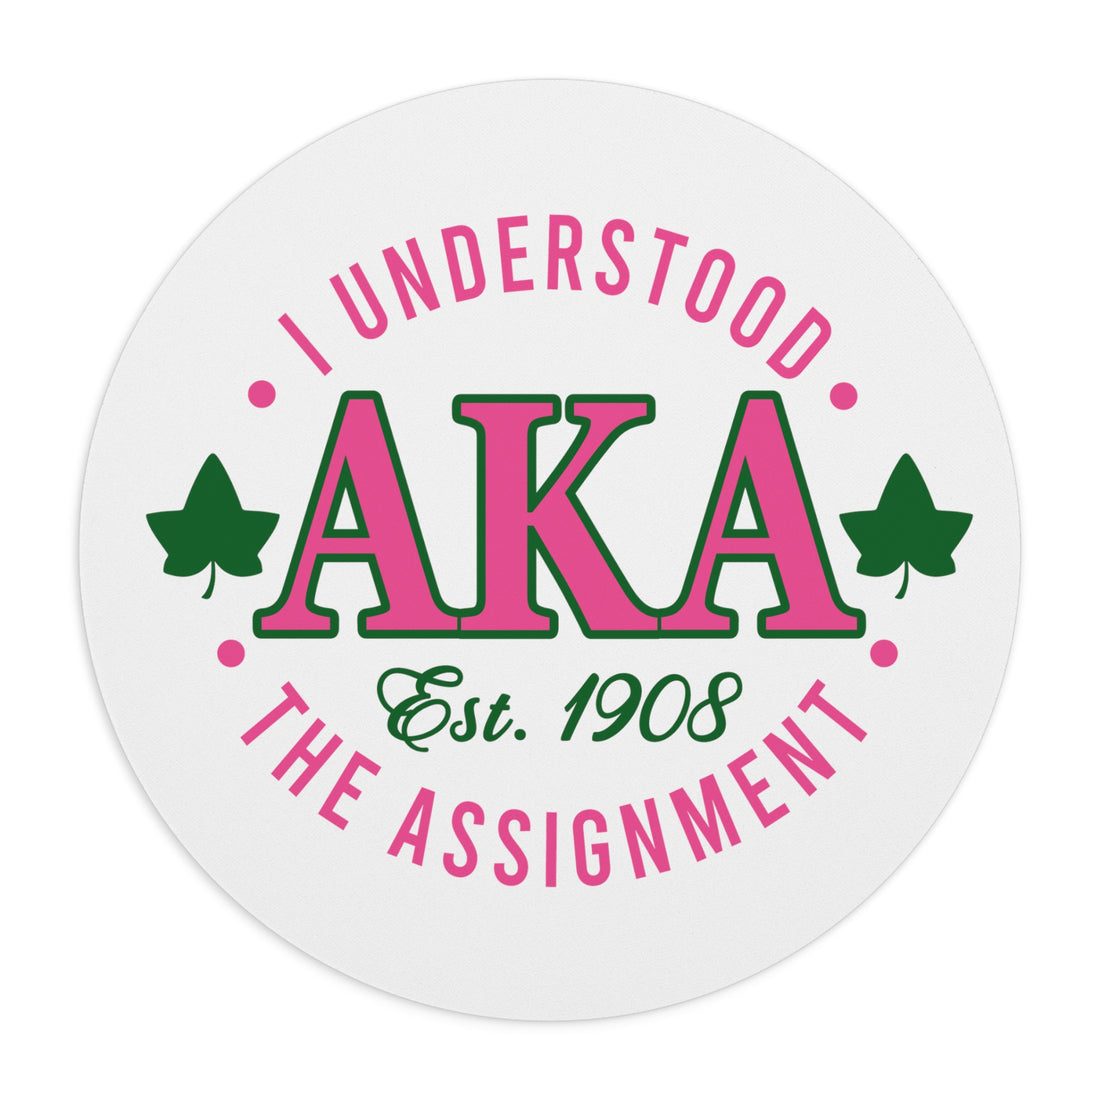 Alpha Kappa Alpha - Understood The Assignment Mouse Pad | Sorority Mouse Pad | Ivy Leaf Mousepad